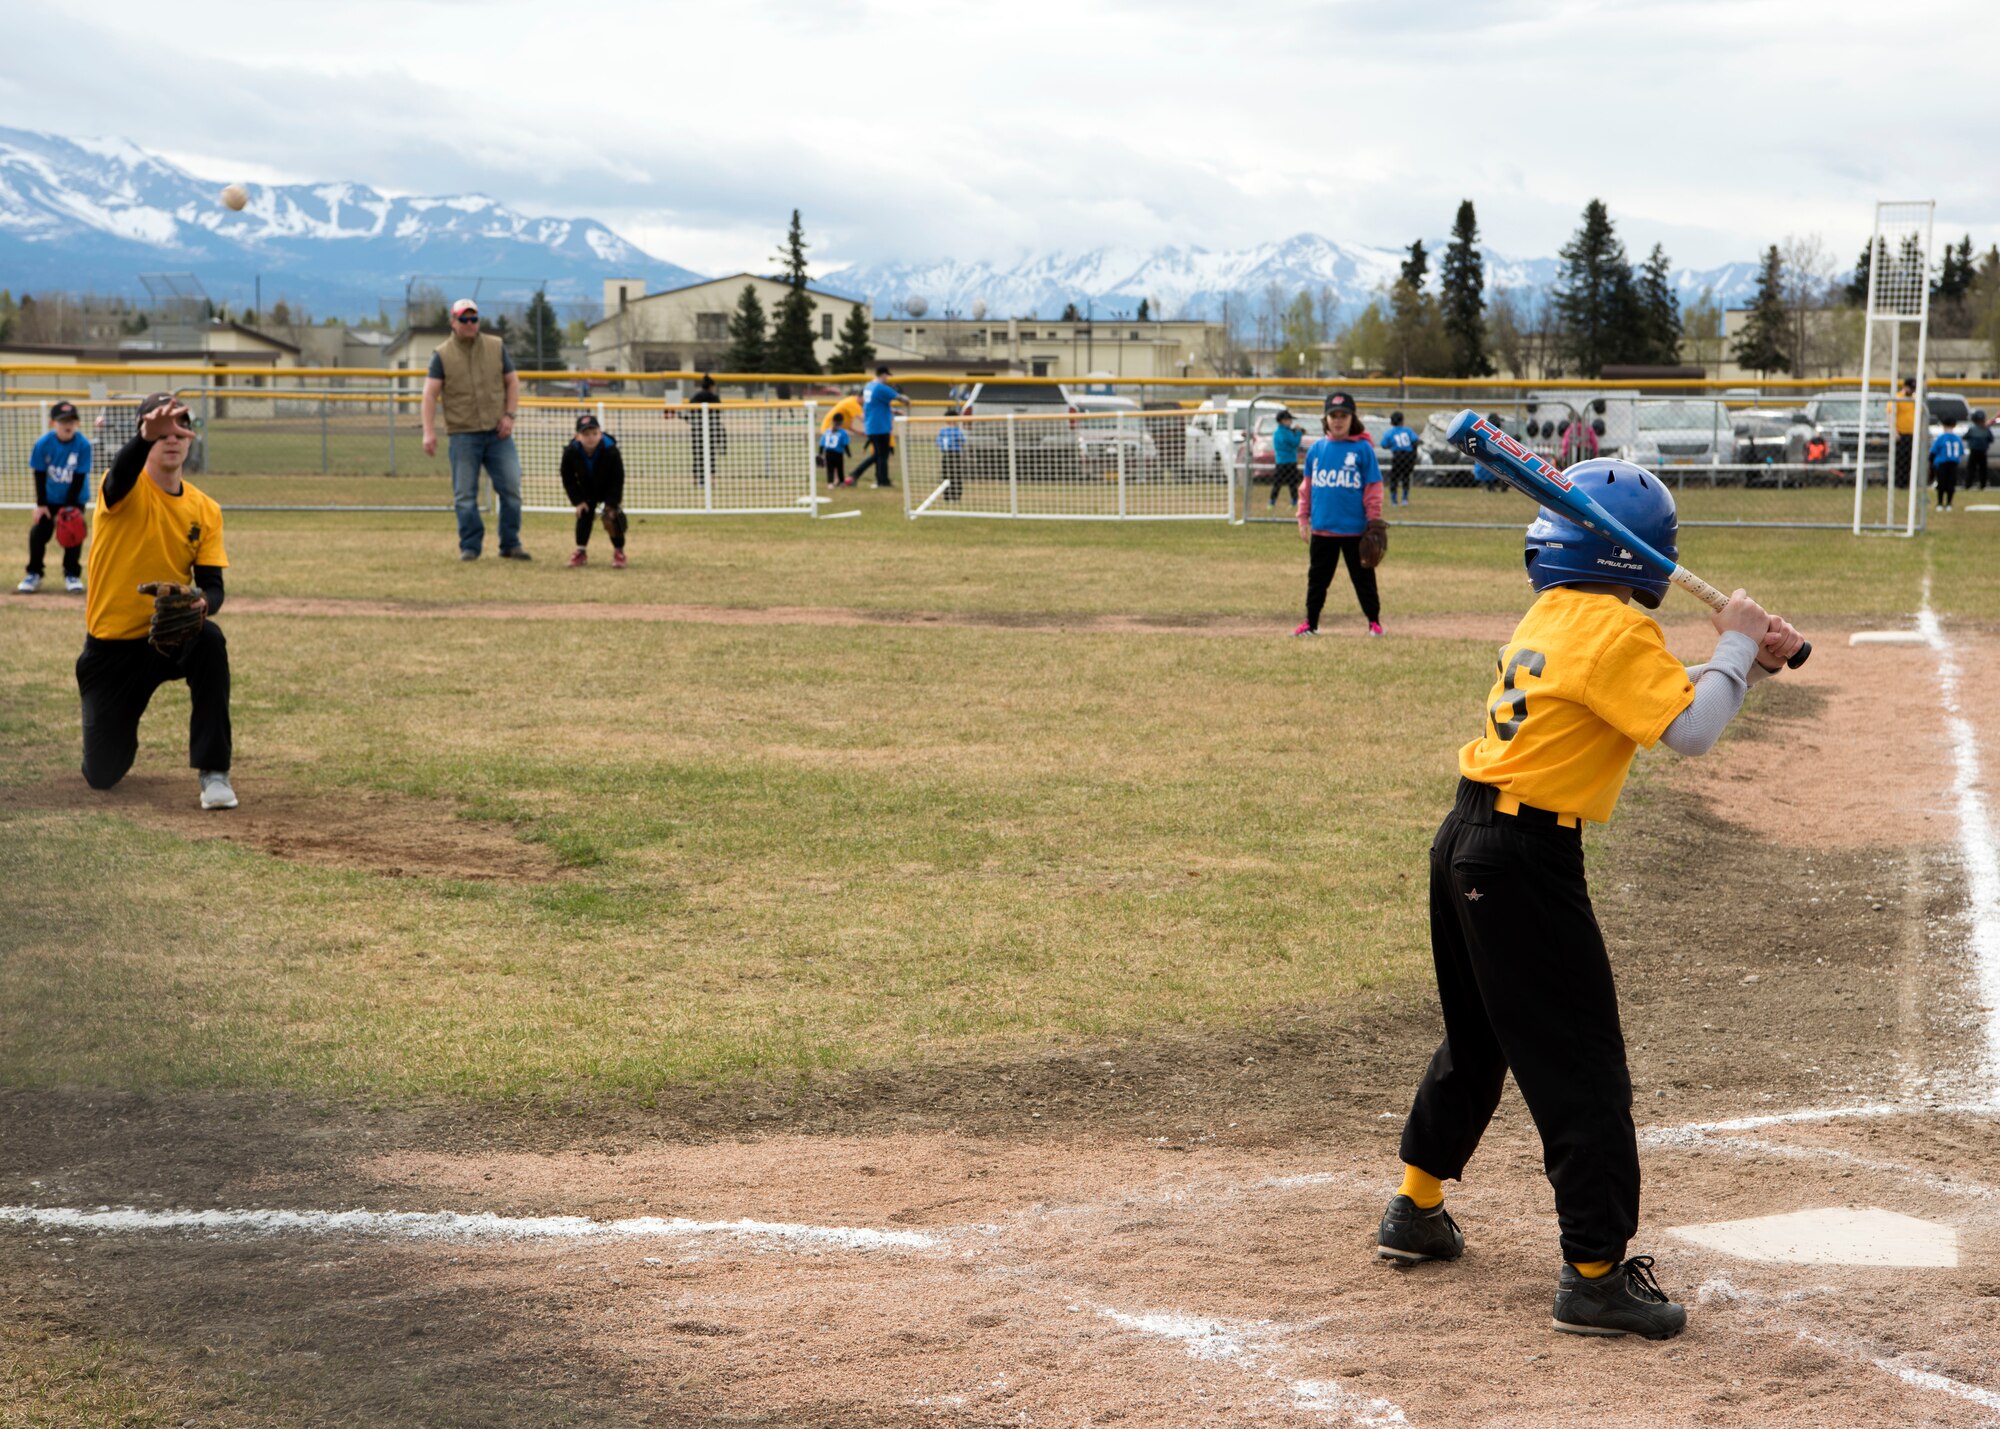 Jack, 8, son of Amber Jeppson, an Army spouse, swings the bat during a coach-pitch Little League opening day game at Joint Base Elmendorf-Richardson, Alaska, May 12, 2018. The games started immediately following the opening day ceremony and continued throughout the day. JBER YSP abides by the National Alliance for Youth Sports-affiliated National Youth Sports Coaches Association, which provides education on topics such as the psychology of coaching youth sports, communication, child abuse, injury prevention, and nutrition and hydration, as well as skills and drills.